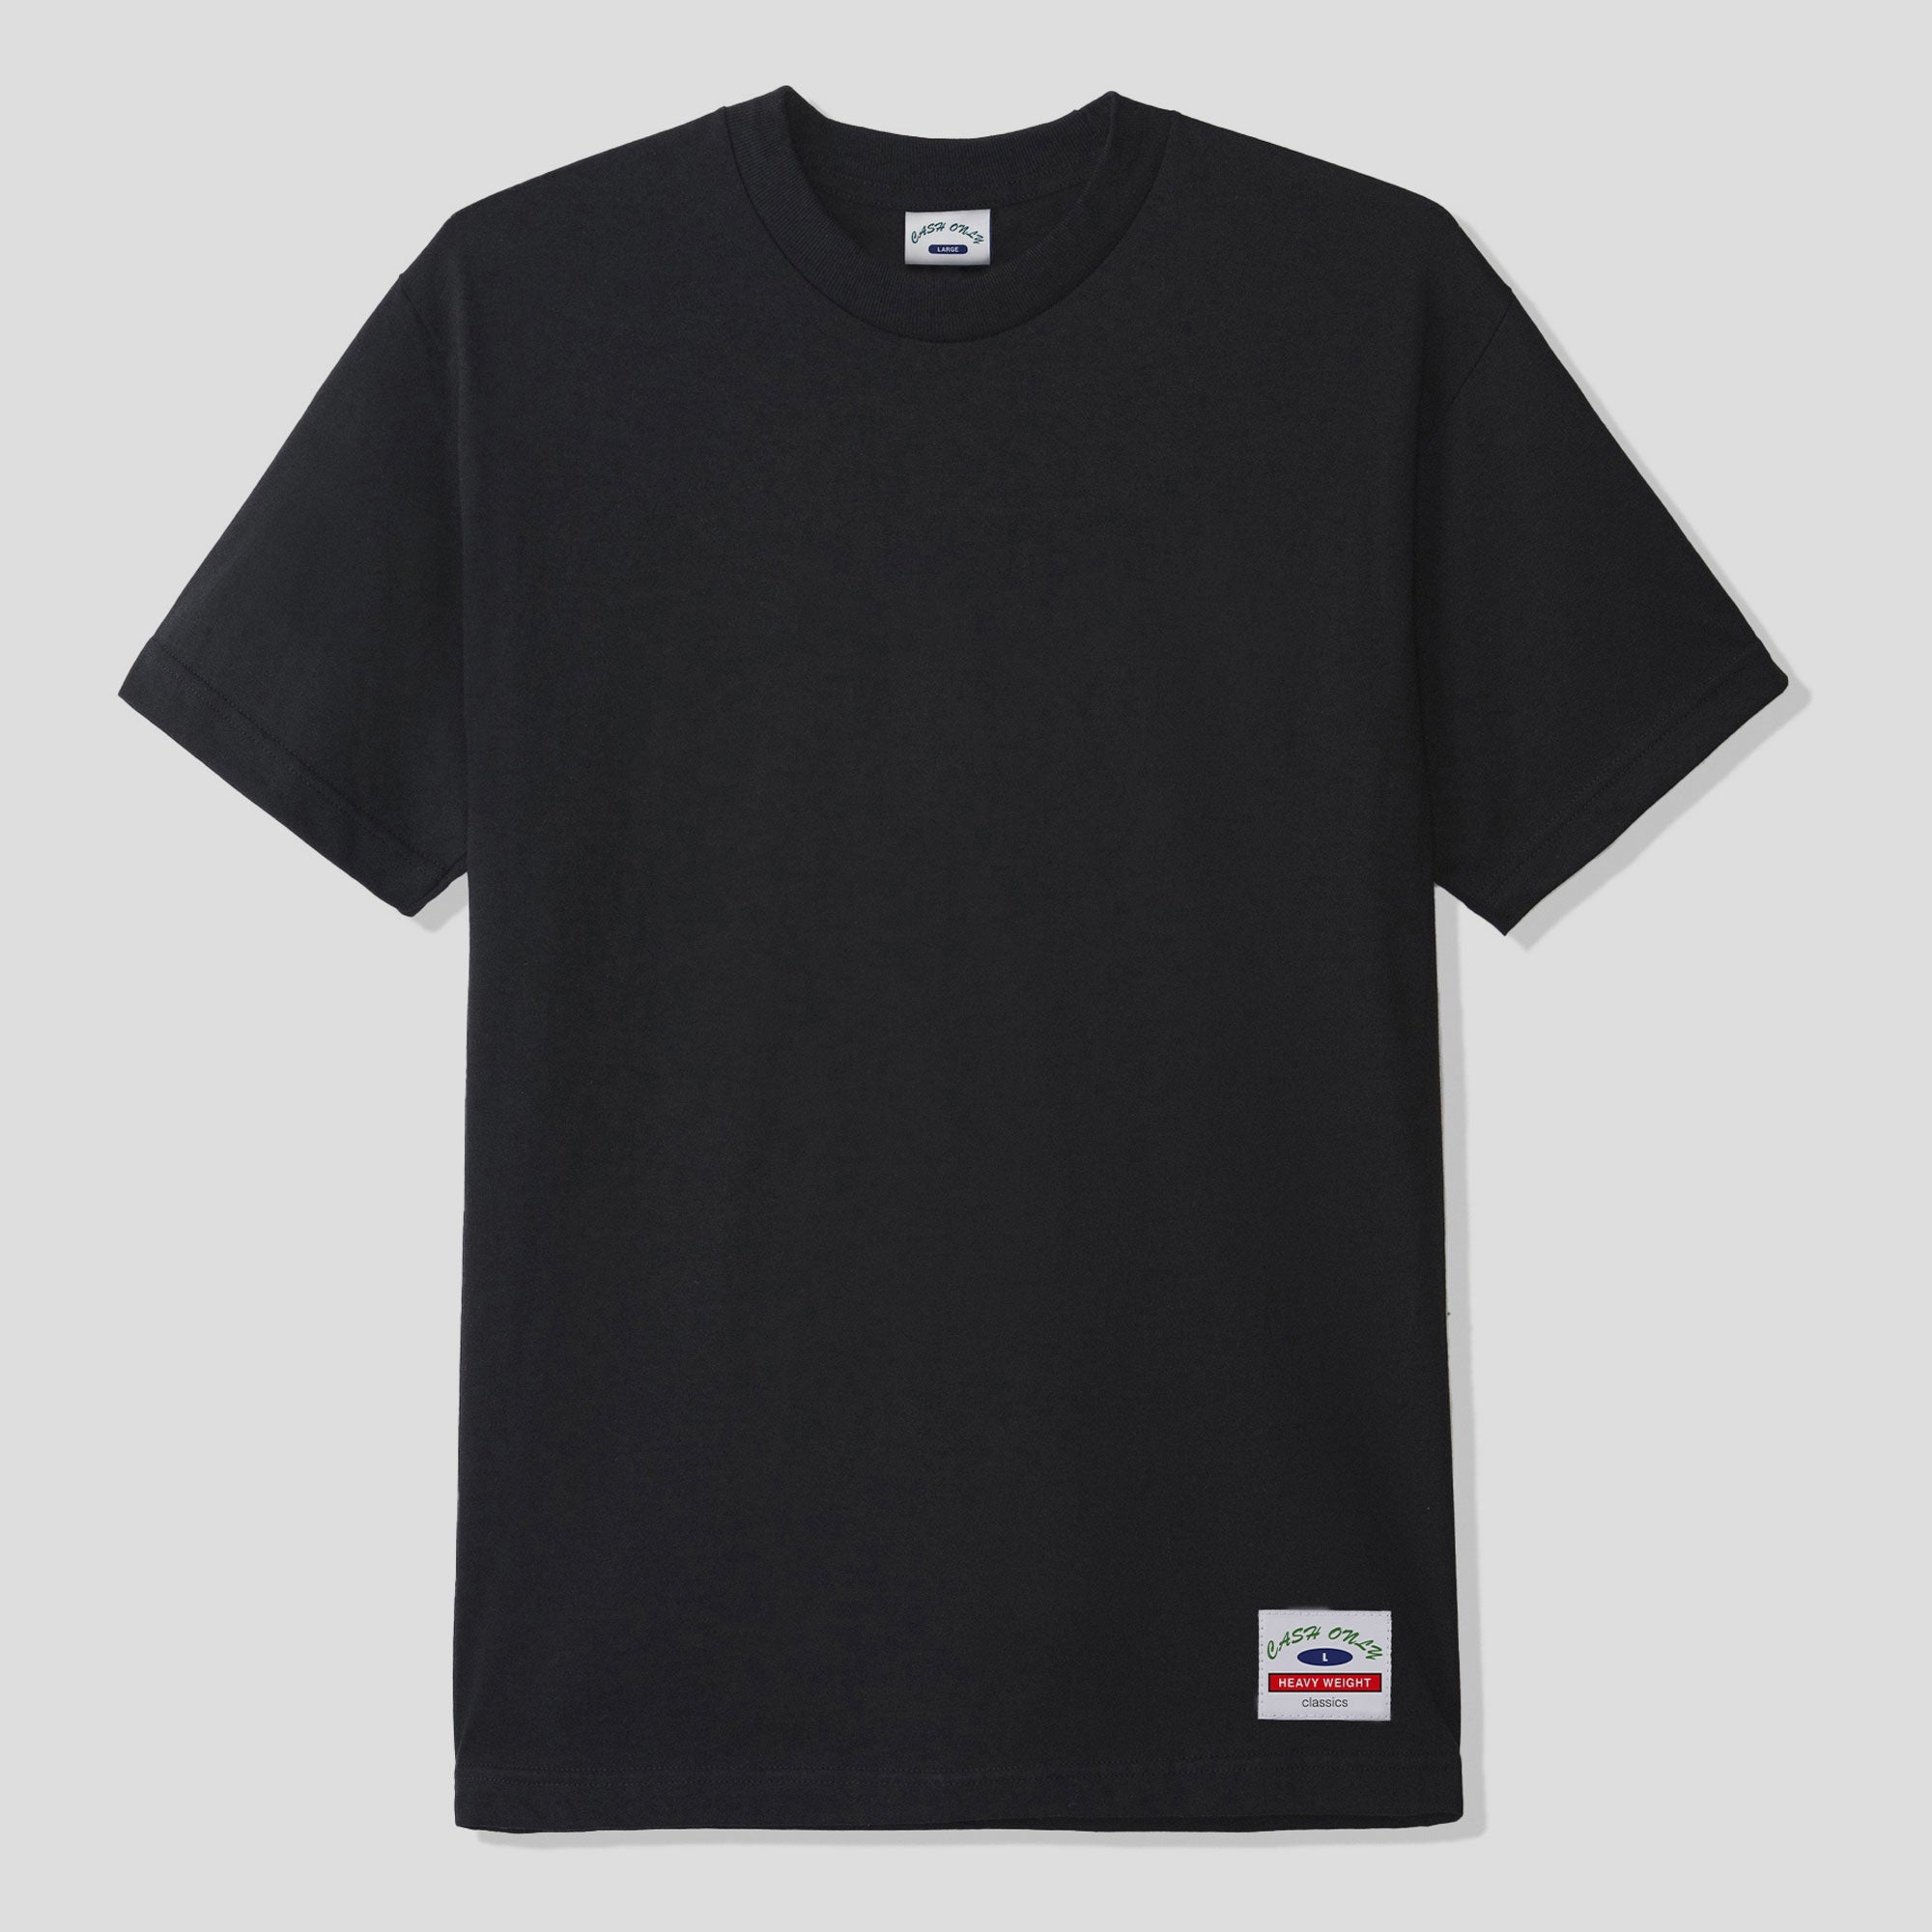 Cash Only Ultra Heavy-Weight Basic Tee - Black